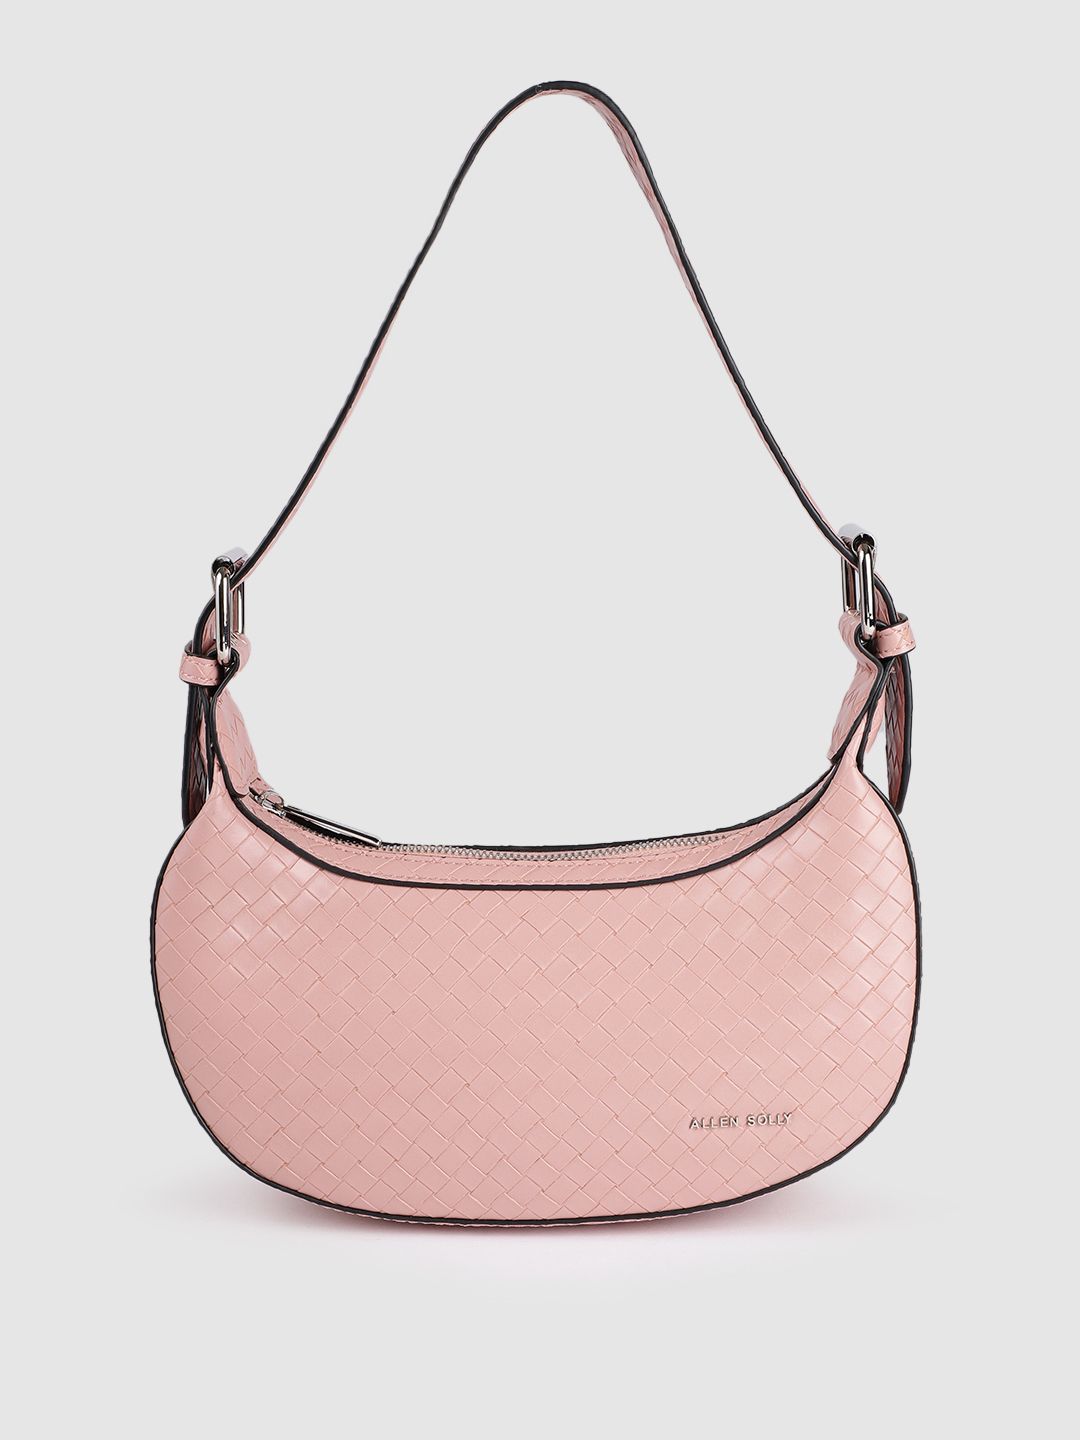 Allen Solly Women Pink Quilted Hobo Bag Price in India